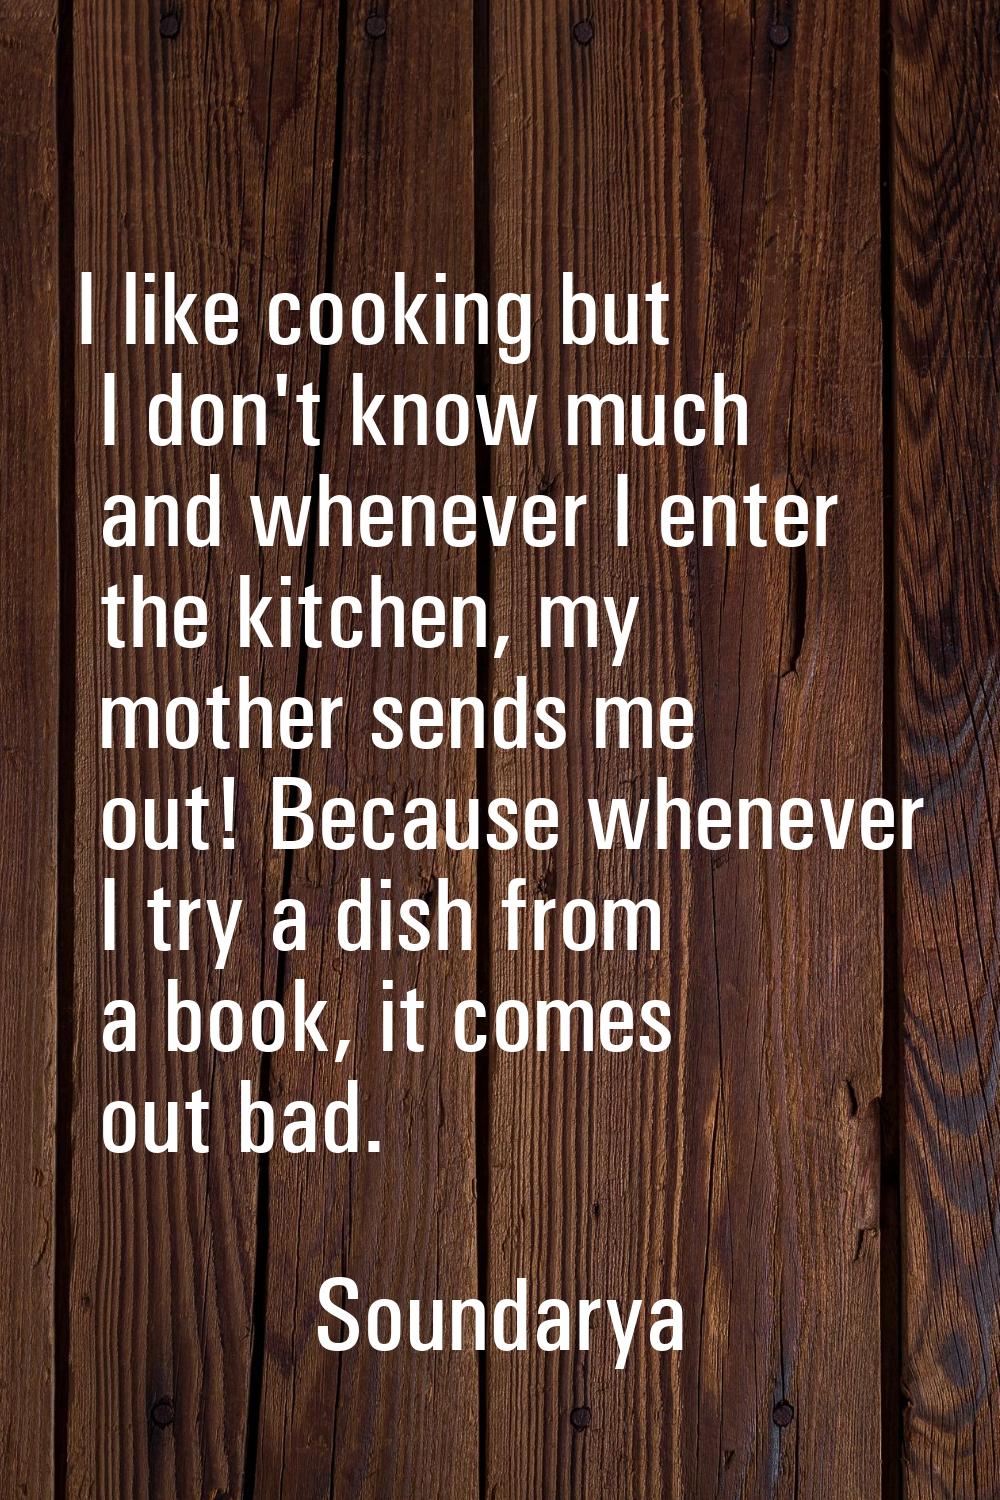 I like cooking but I don't know much and whenever I enter the kitchen, my mother sends me out! Beca